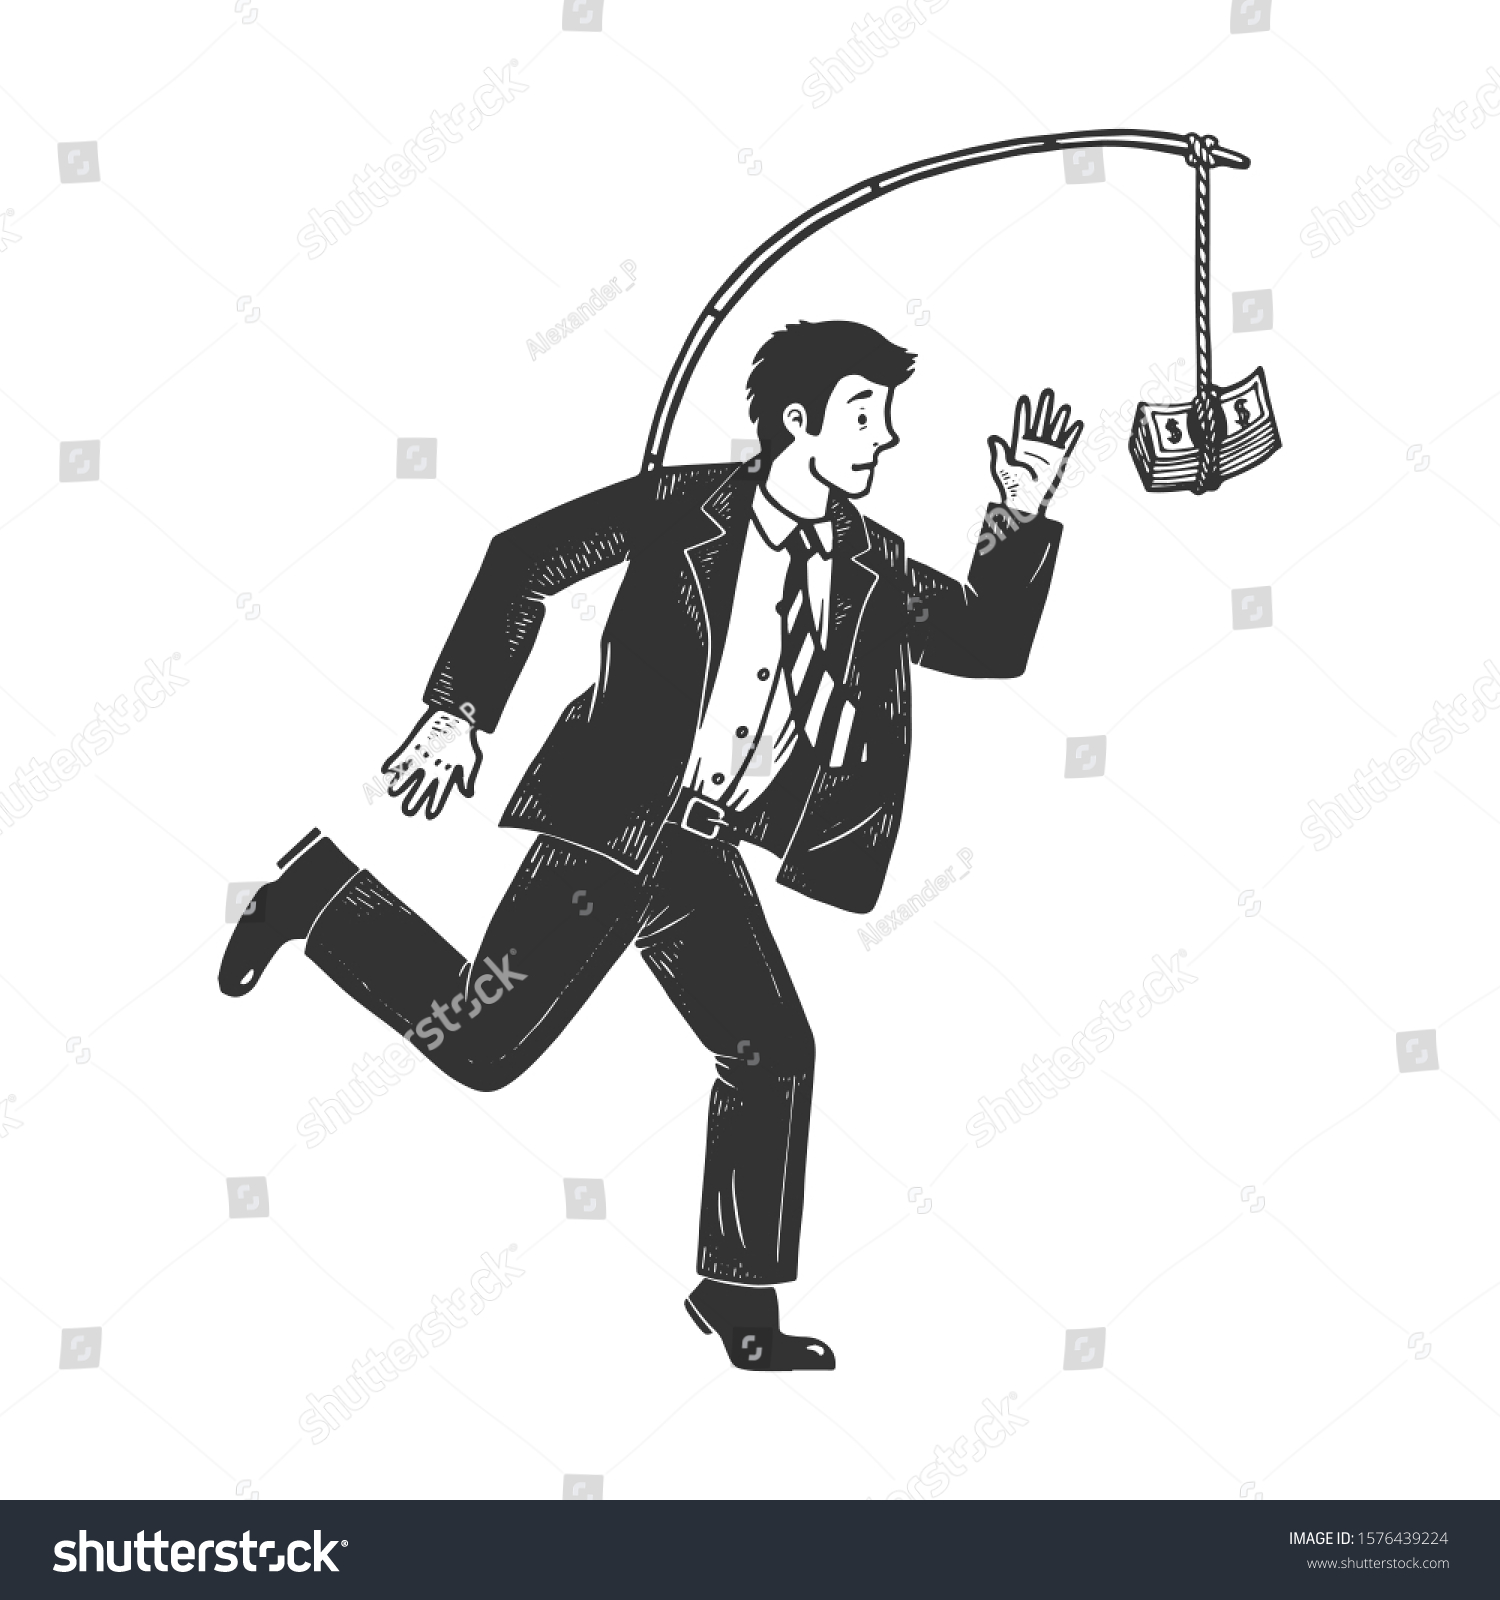 SVG of Businessman chasing money that is tied to him sketch engraving vector illustration. Metaphor of hedonic treadmill. T-shirt apparel print design. Scratch board style imitation.  svg